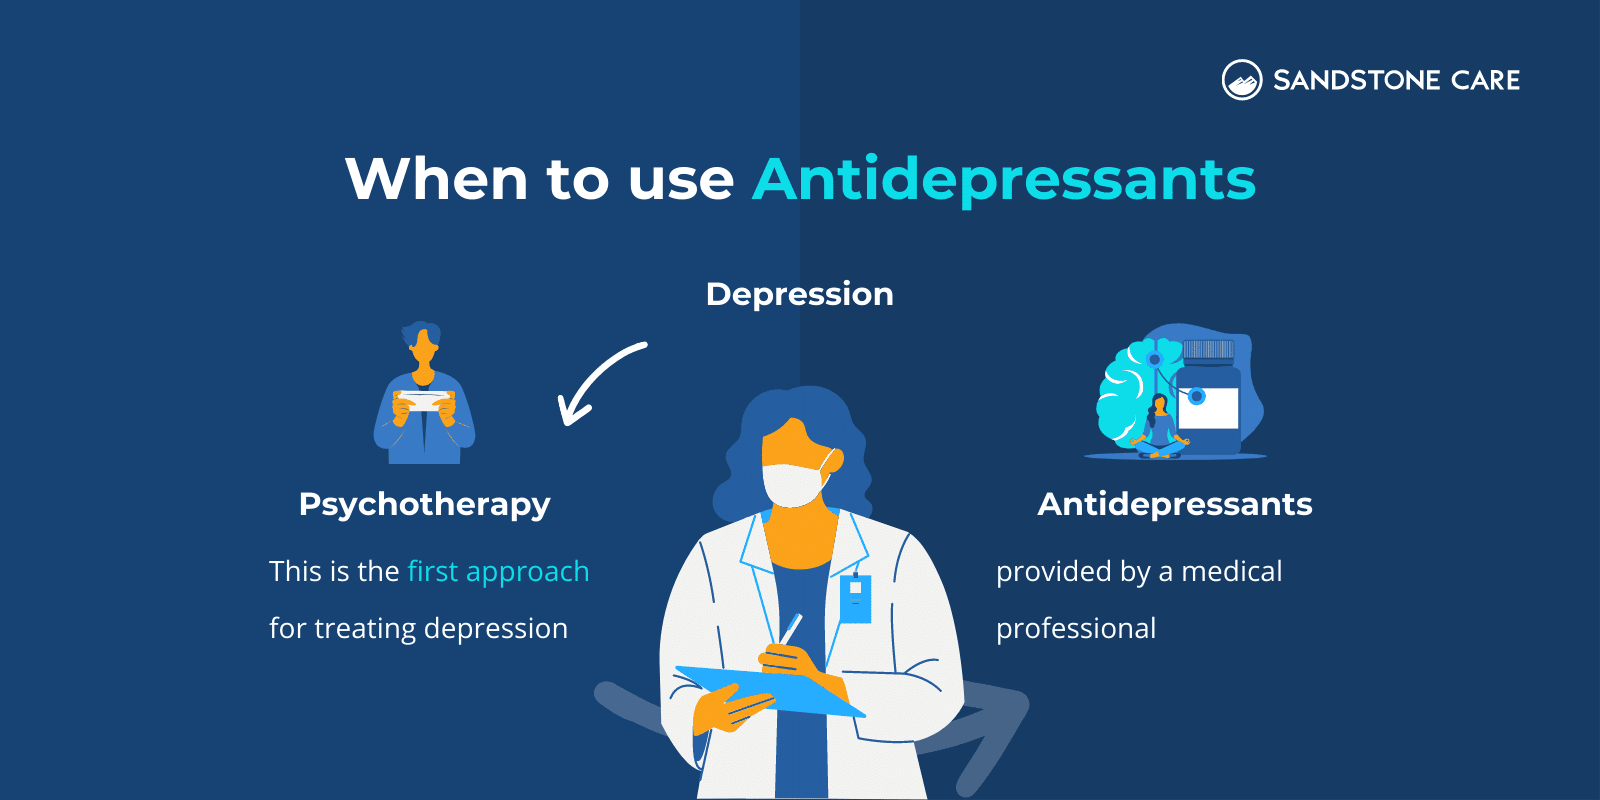 "When to use antidepressants" illustrated with 2 ways to treat depression using psychotherapy (first approach), and antidepressants are provided as a supplement